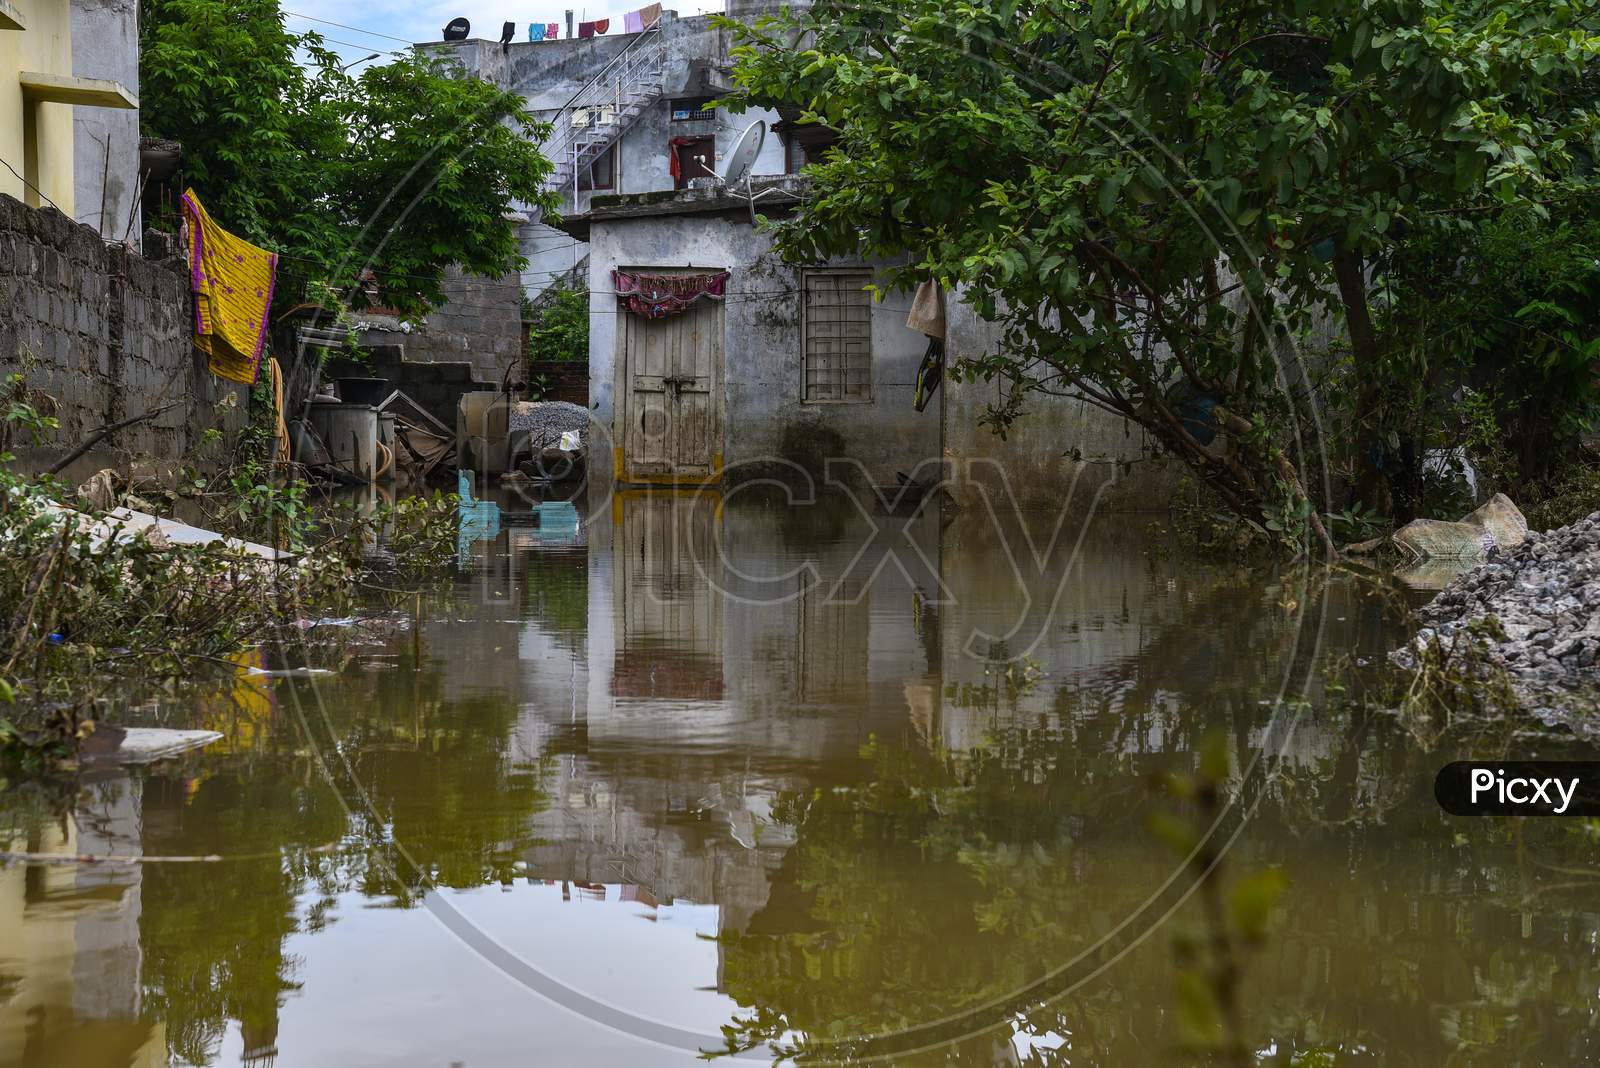 A house that is still inundated under water even after 4 days of flood in Warangal, hanamkonda, August 18, 2020.